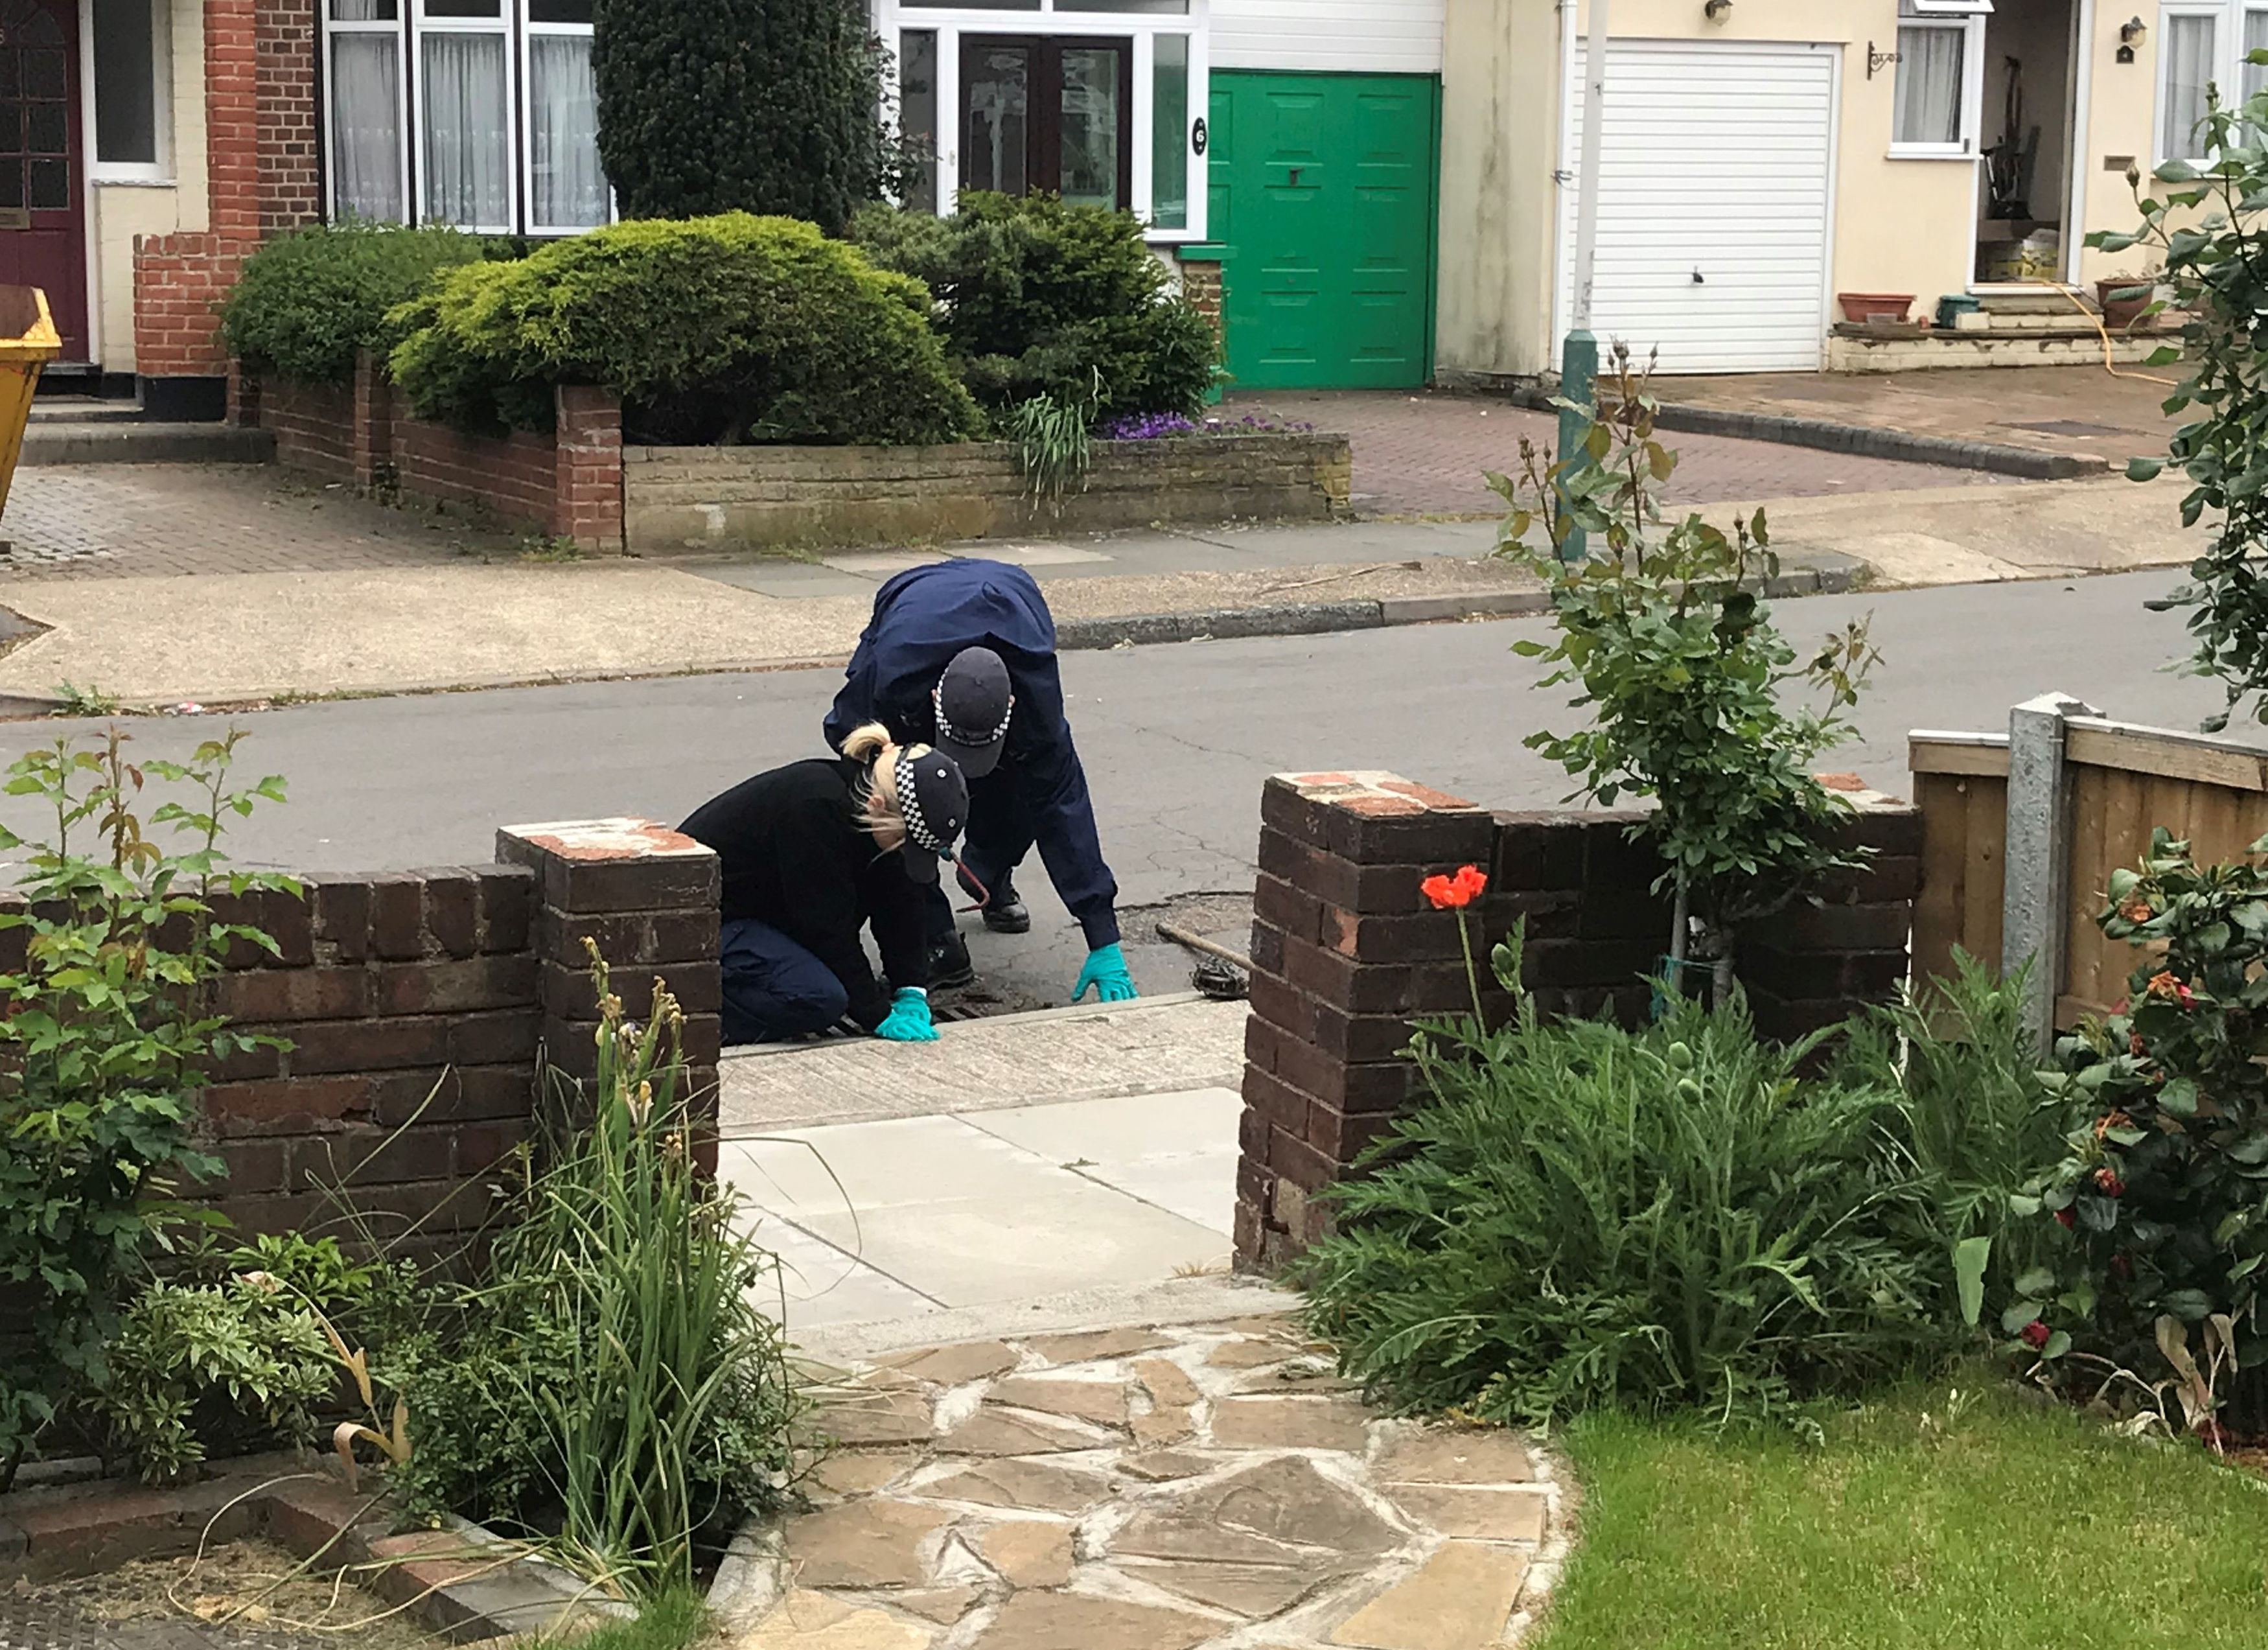 Police officers searching drains in Ashmour Gardens, Romford (Thomas Hornall/PA)